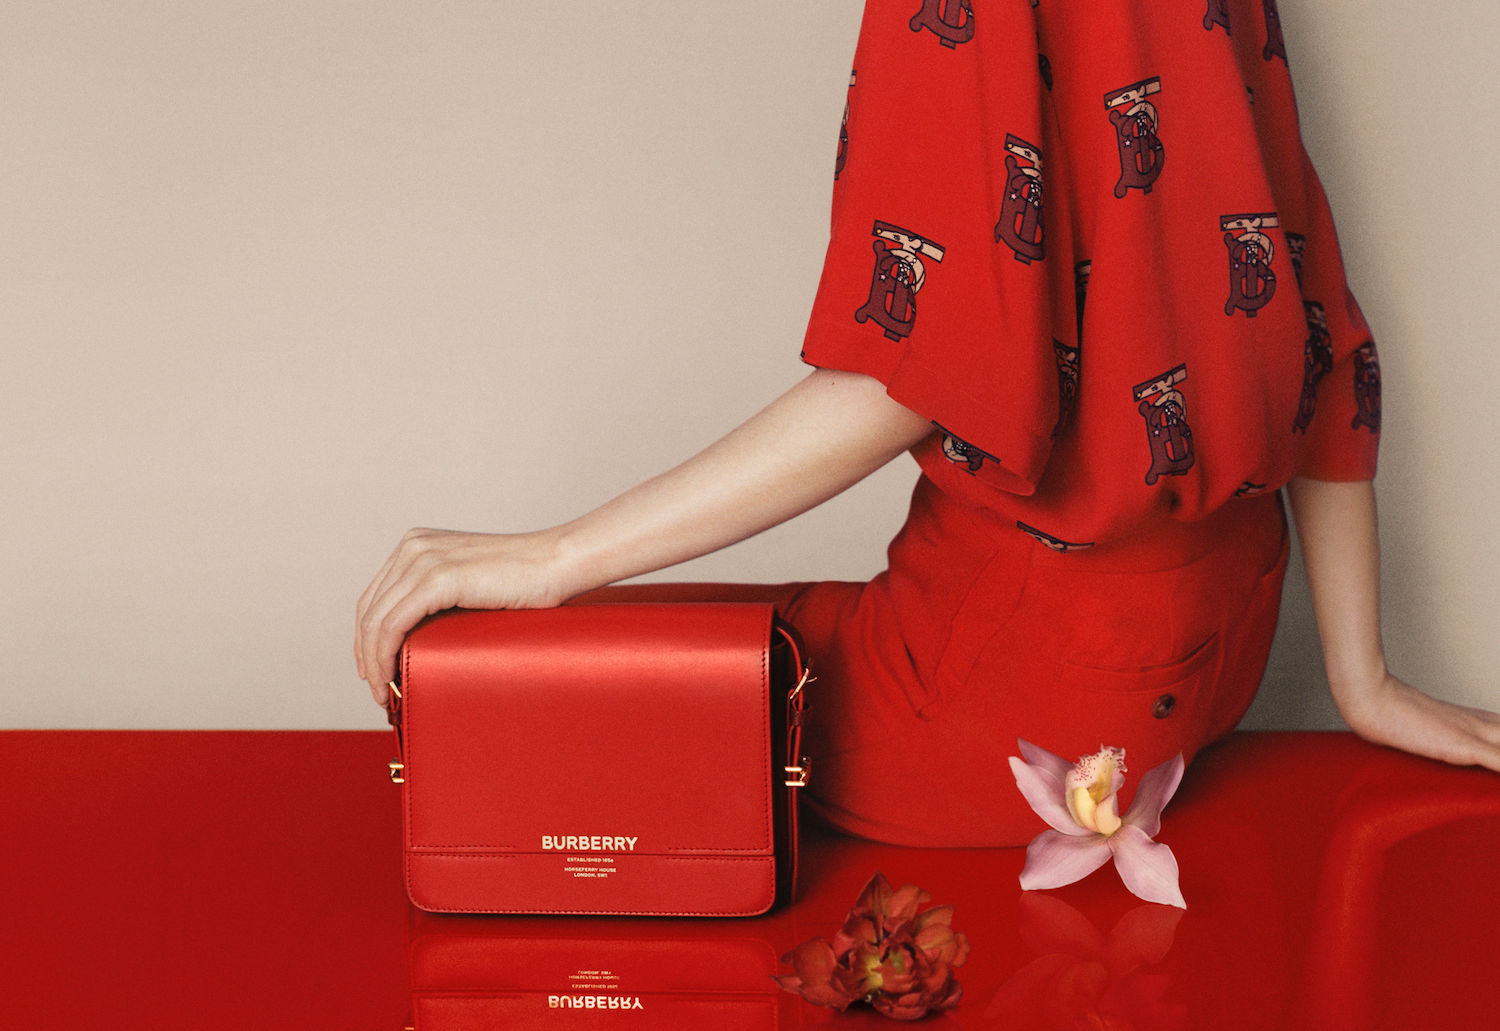 Burberry’s New CNY 2020 Campaign is all About Red